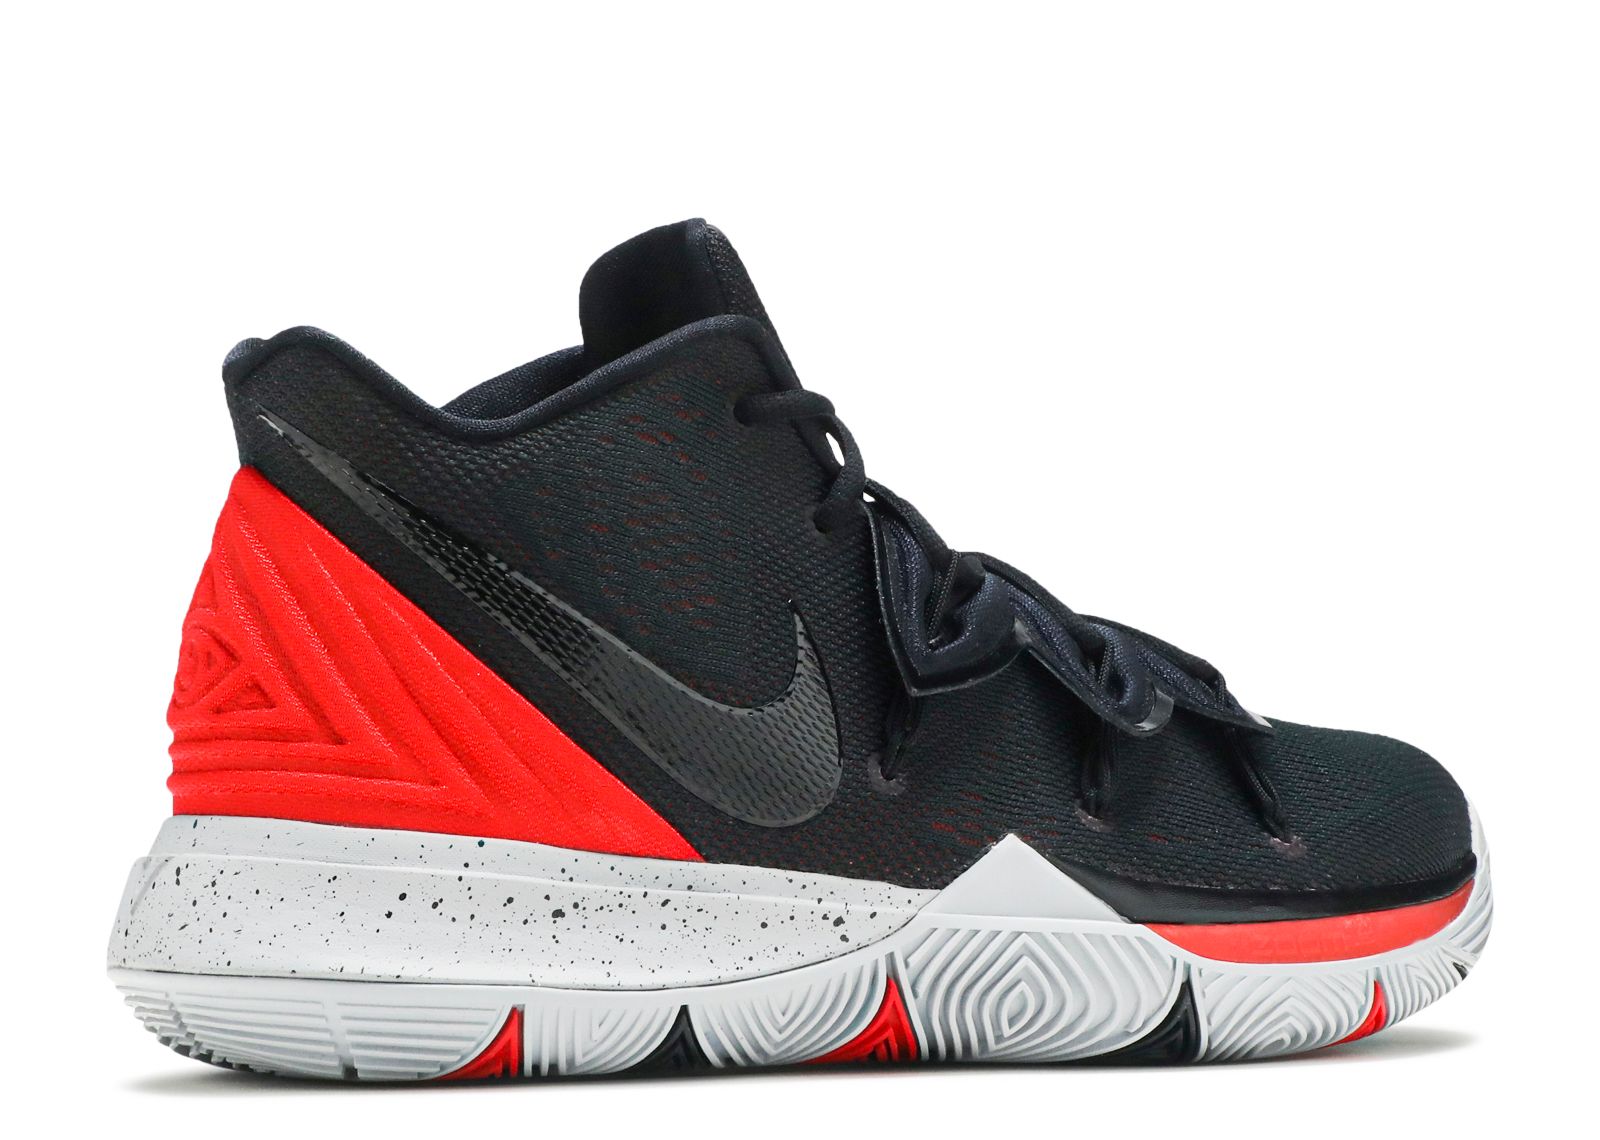 7 Reasons to NOT to Buy Nike Kyrie 5 Aug 2020 RunRepeat